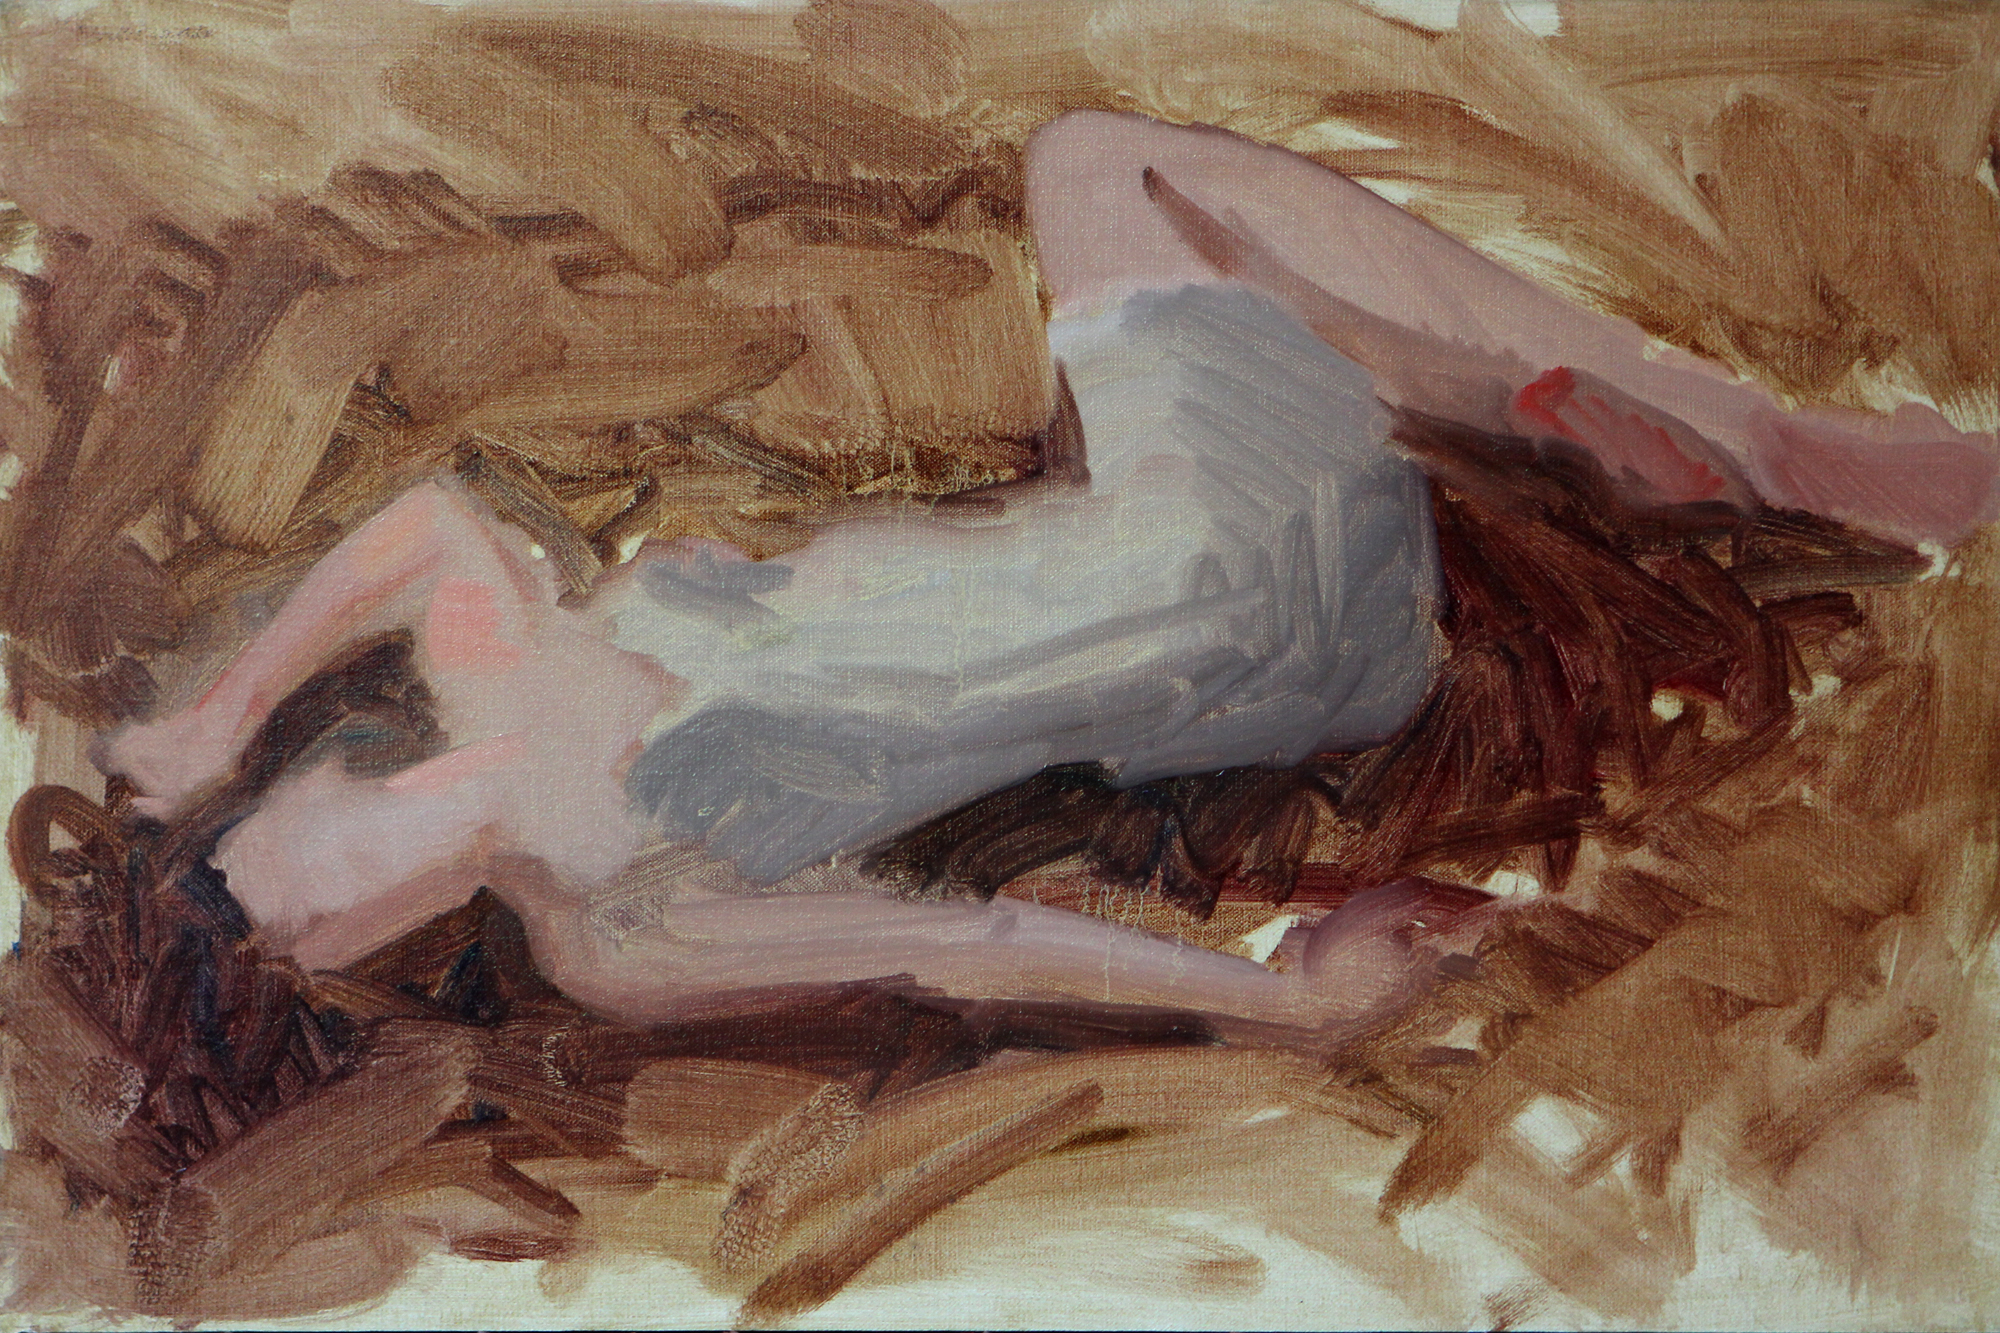 Step 3: Adding values to the figure painting